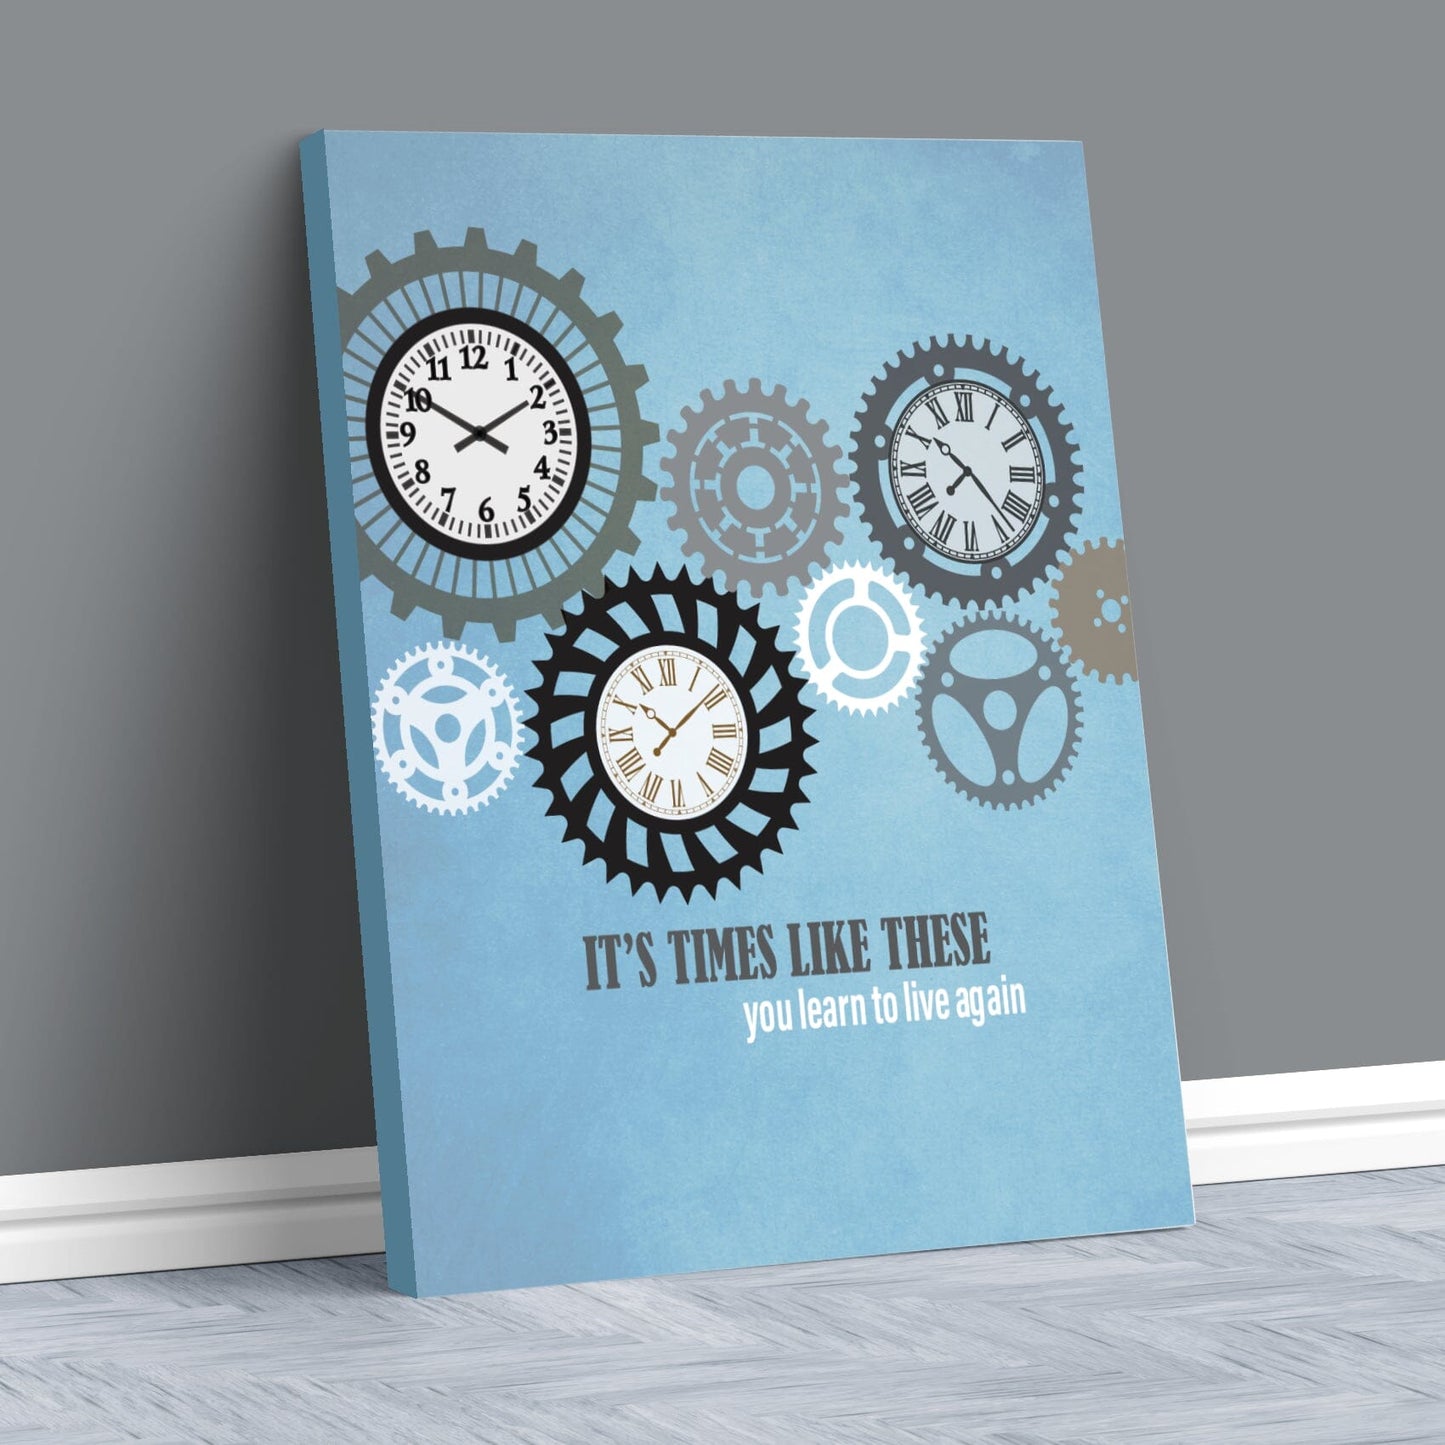 Times Like These by Foo Fighters - Song Lyric Art Print Song Lyrics Art Song Lyrics Art 